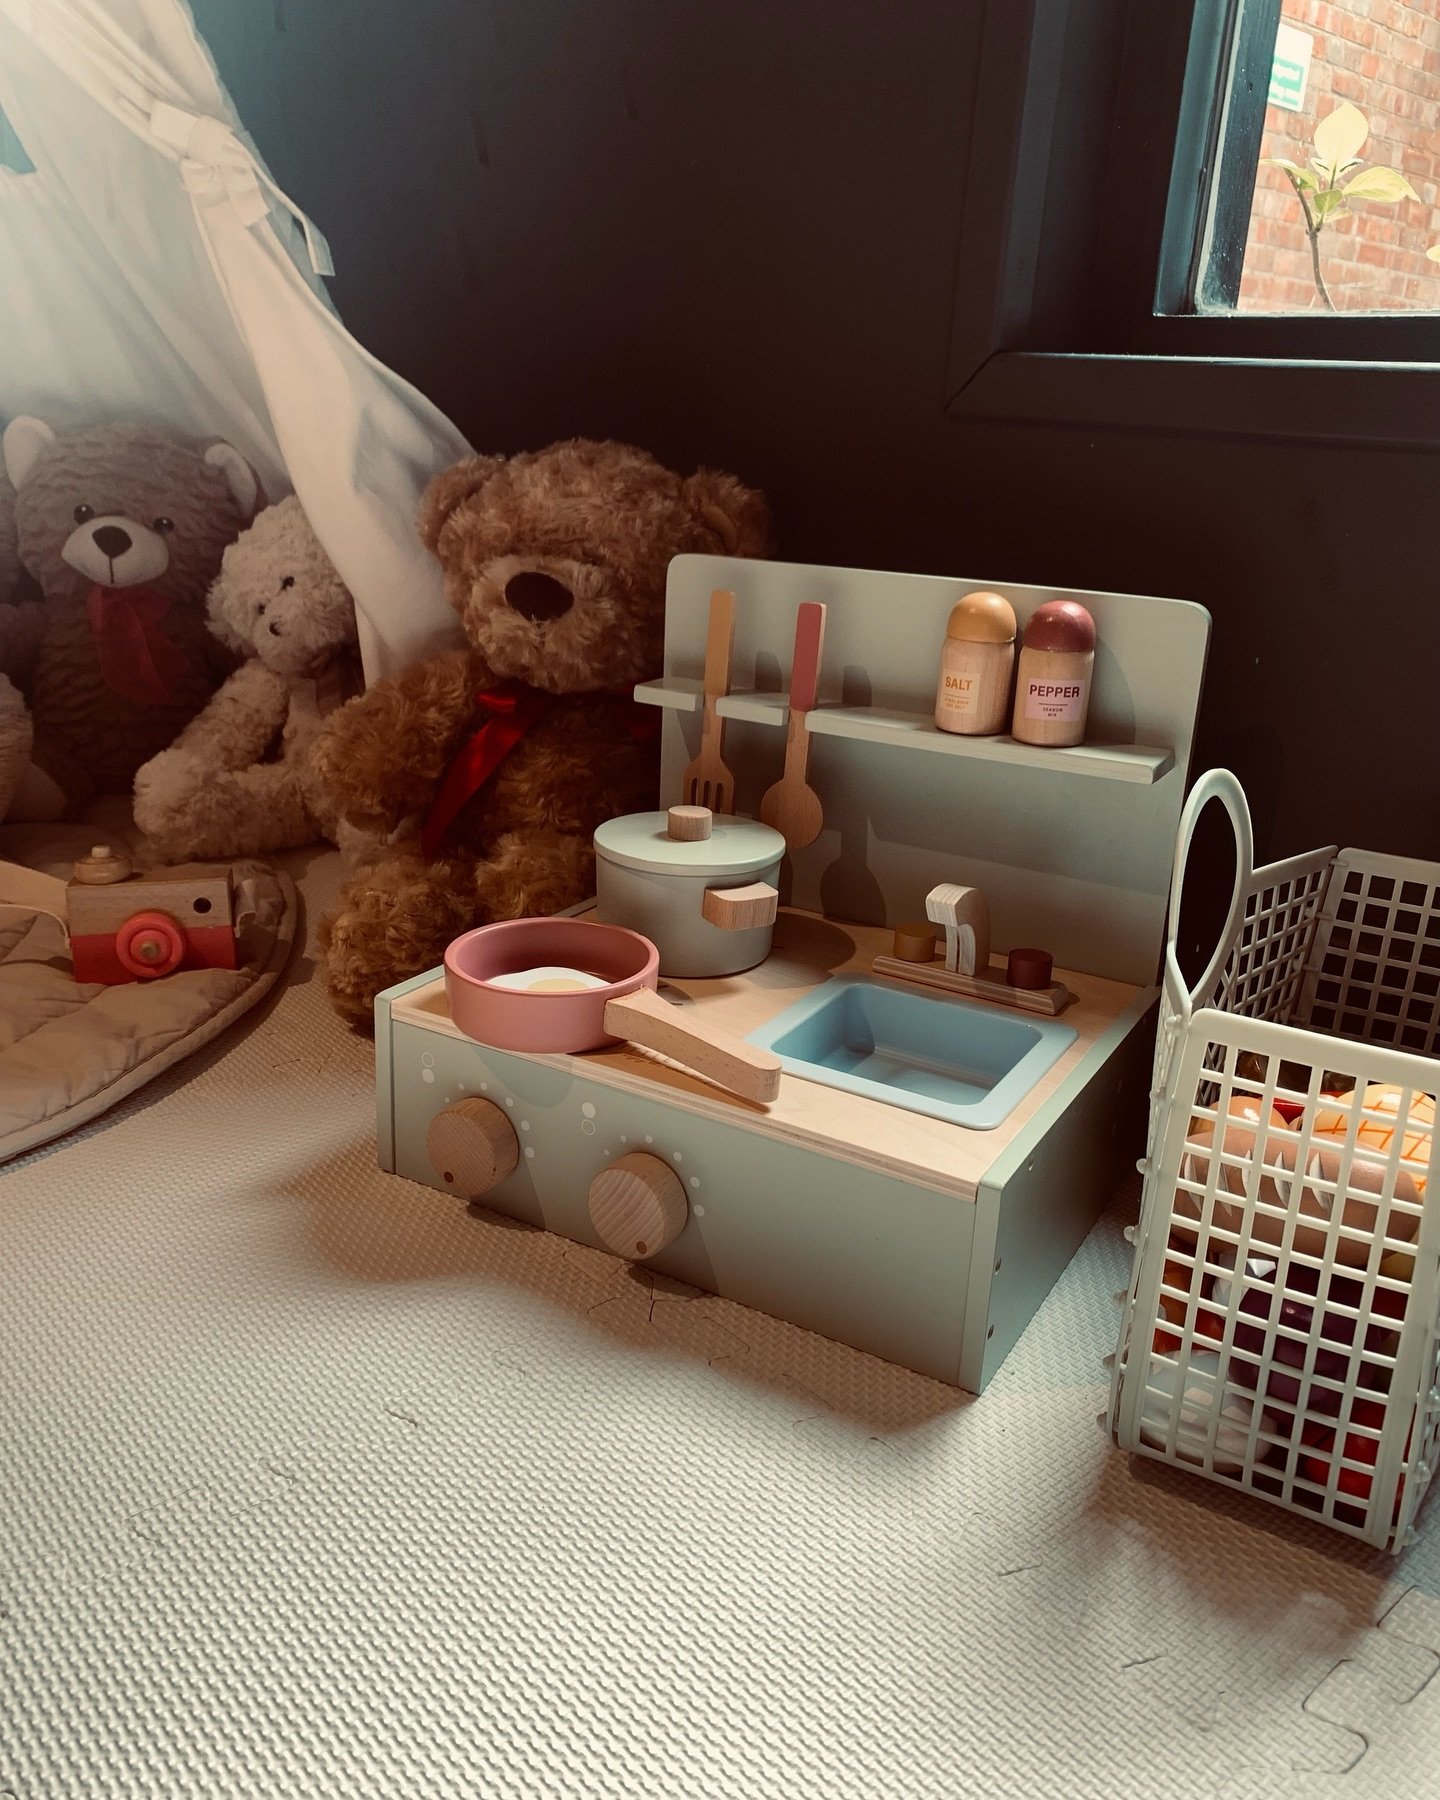 Our new mini kitchen! With more coming soon! ⁣
⁣
Available with our birthday and wedding play area packages 🤍⁣
⁣
📍 North Herts/South Beds/St Albans⁣
⁣
⁣
⁣
⁣
⁣
#hitchinparents #harpendenparents #lutonparents #hitchinmums #lutonmums #harpendenmums #h